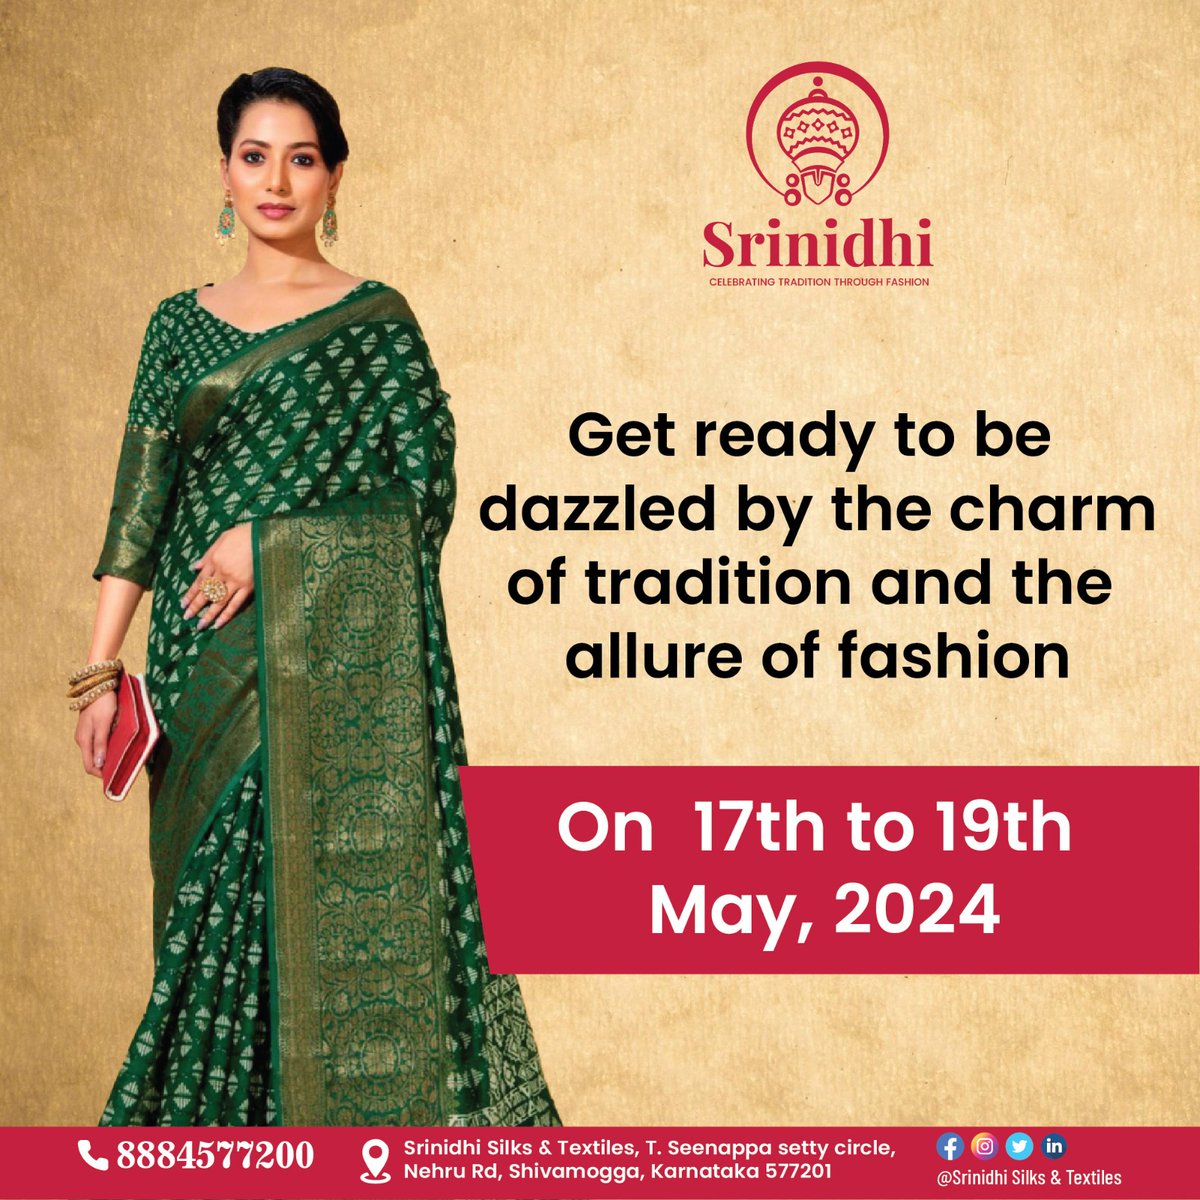 Prepare to be swept away by the timeless elegance of tradition and the irresistible allure of fashion! From the 17th to the 19th of May, 2024, Srinidhi Silks & Textiles invites you to immerse yourself in a world where heritage meets haute couture.
#Srinidhitextile #SilkSarees